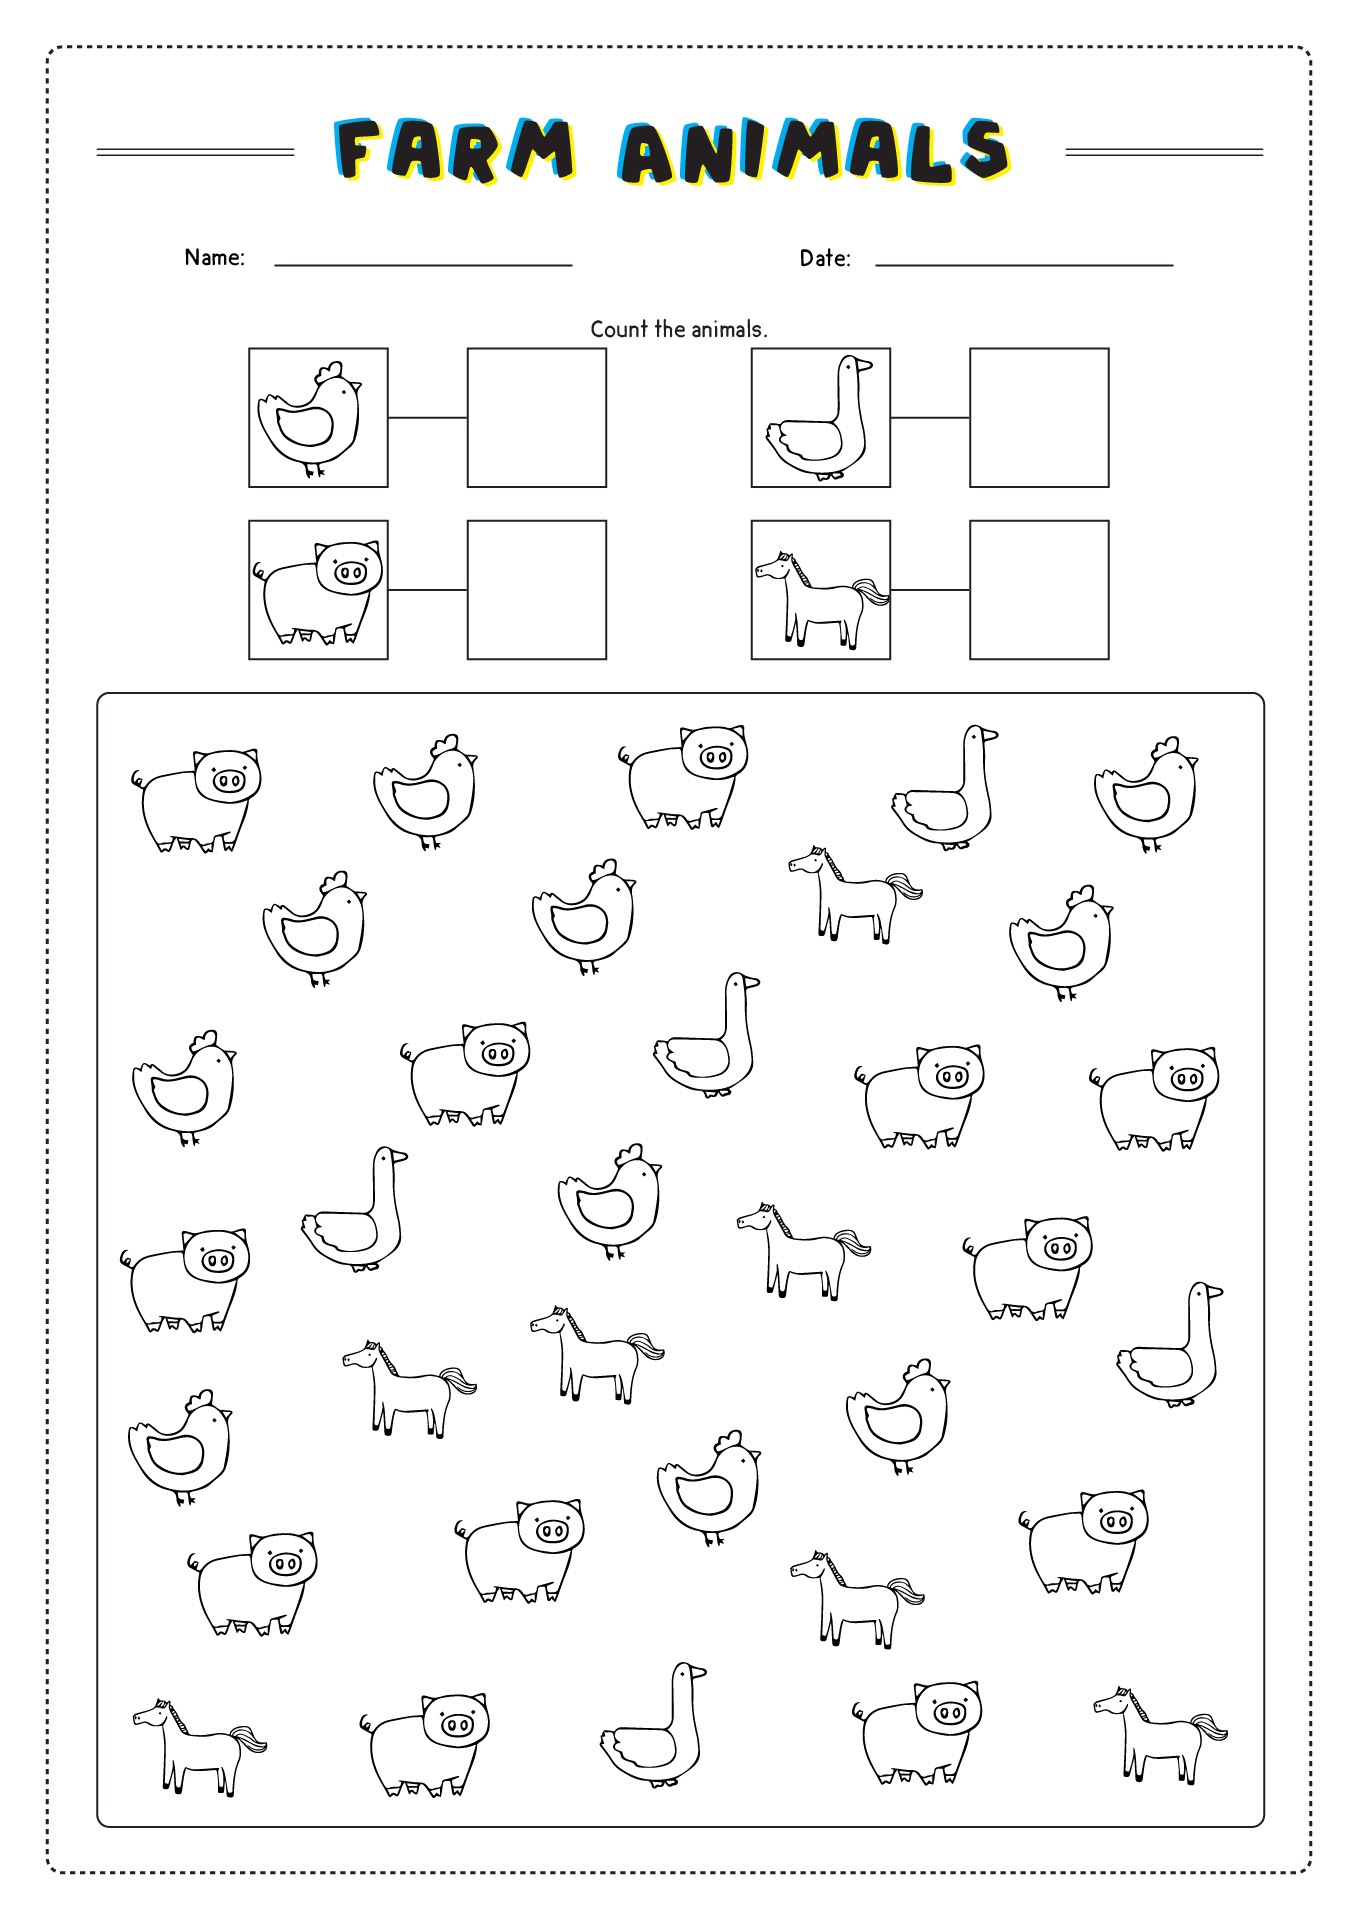 10 Best Images Of Farm Animals Worksheets For Kids Printable Farm Animals Worksheets Printable 